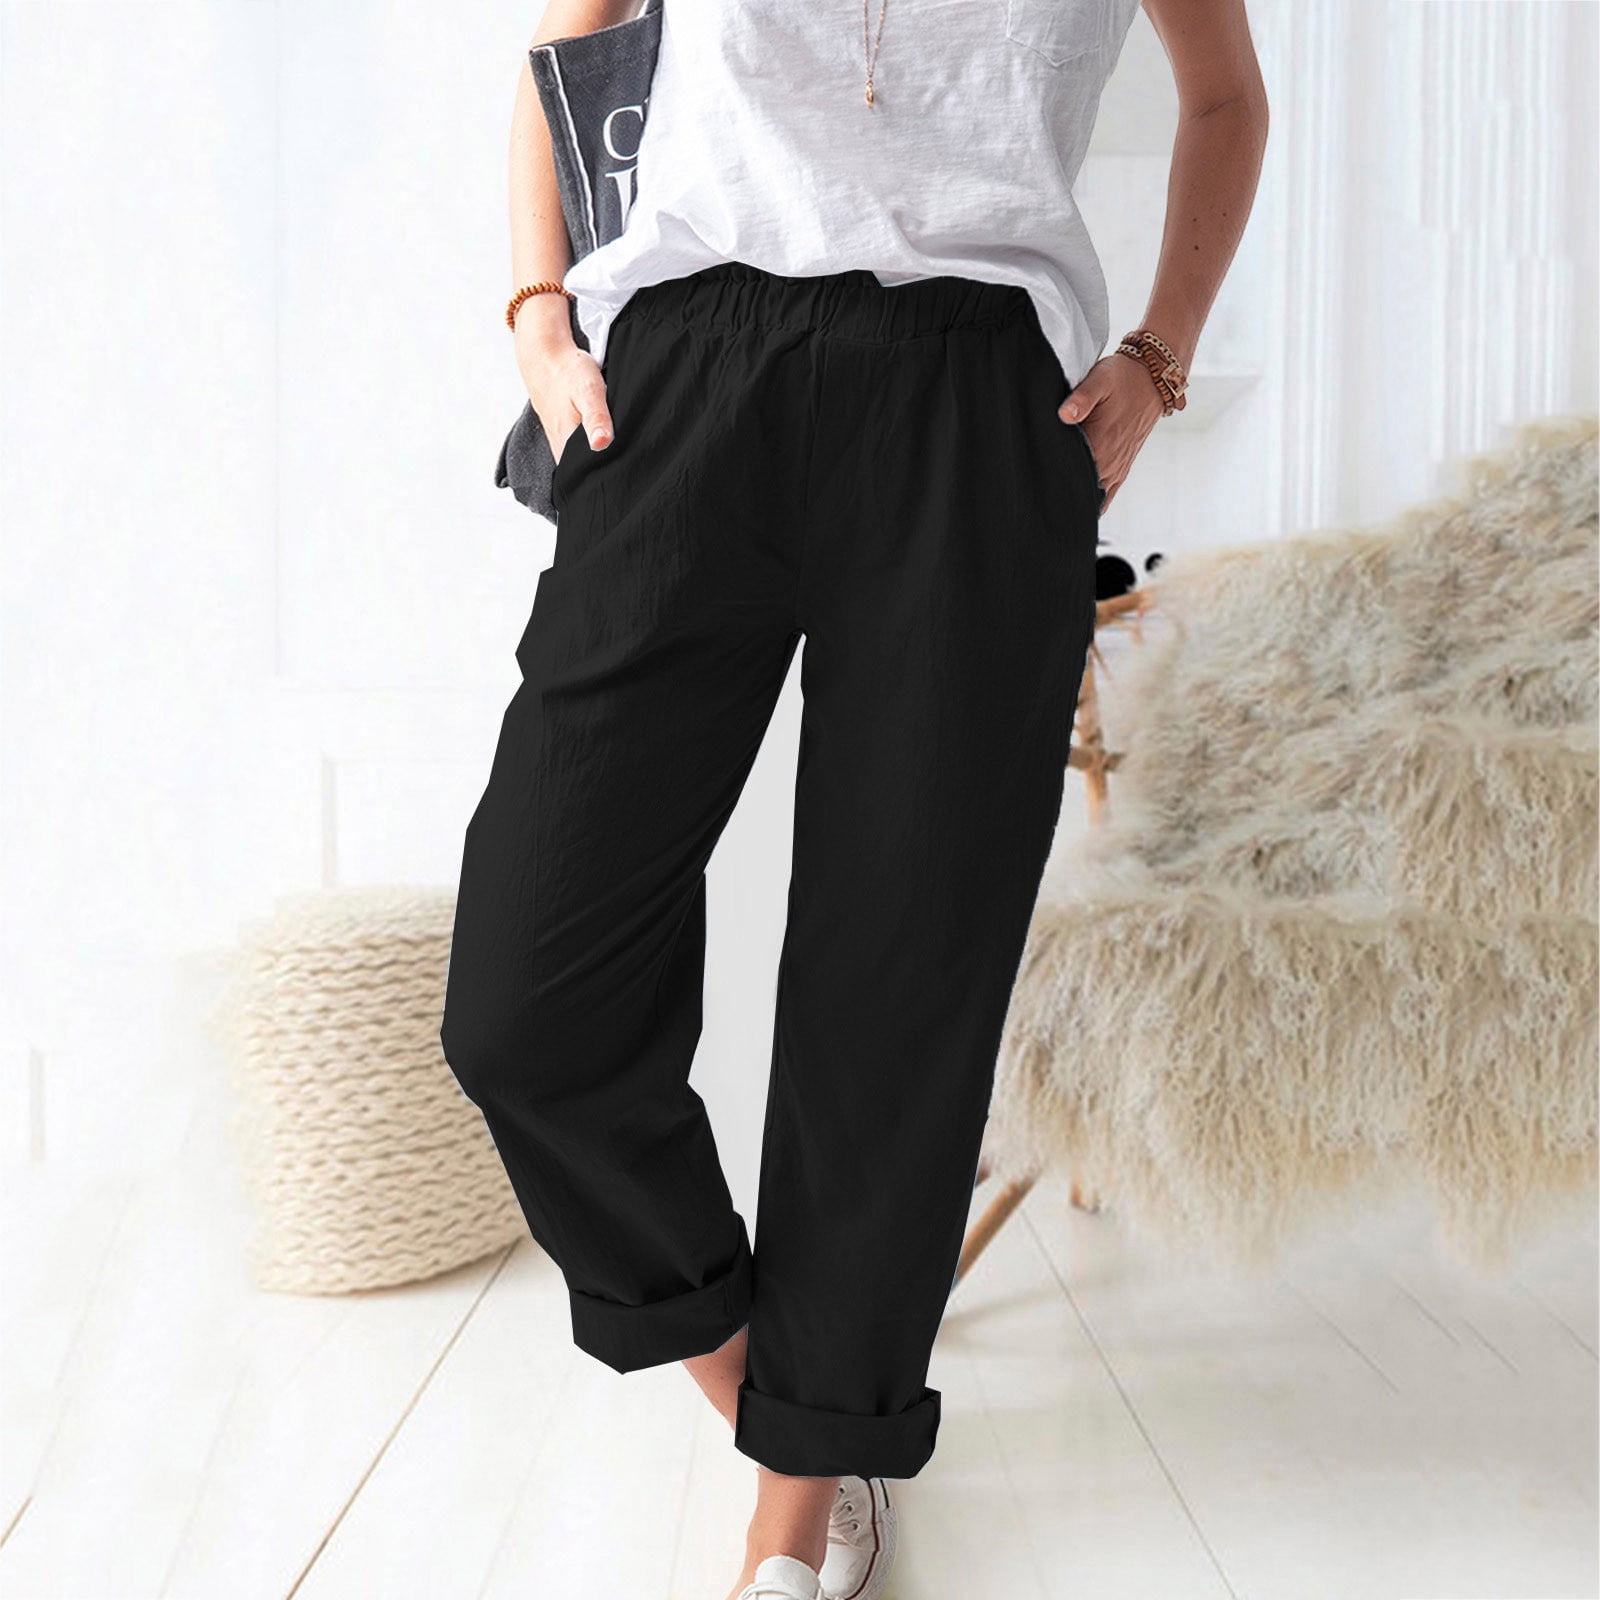 Cotton Pants for Women Loose Fit Business Casual Zimbabwe